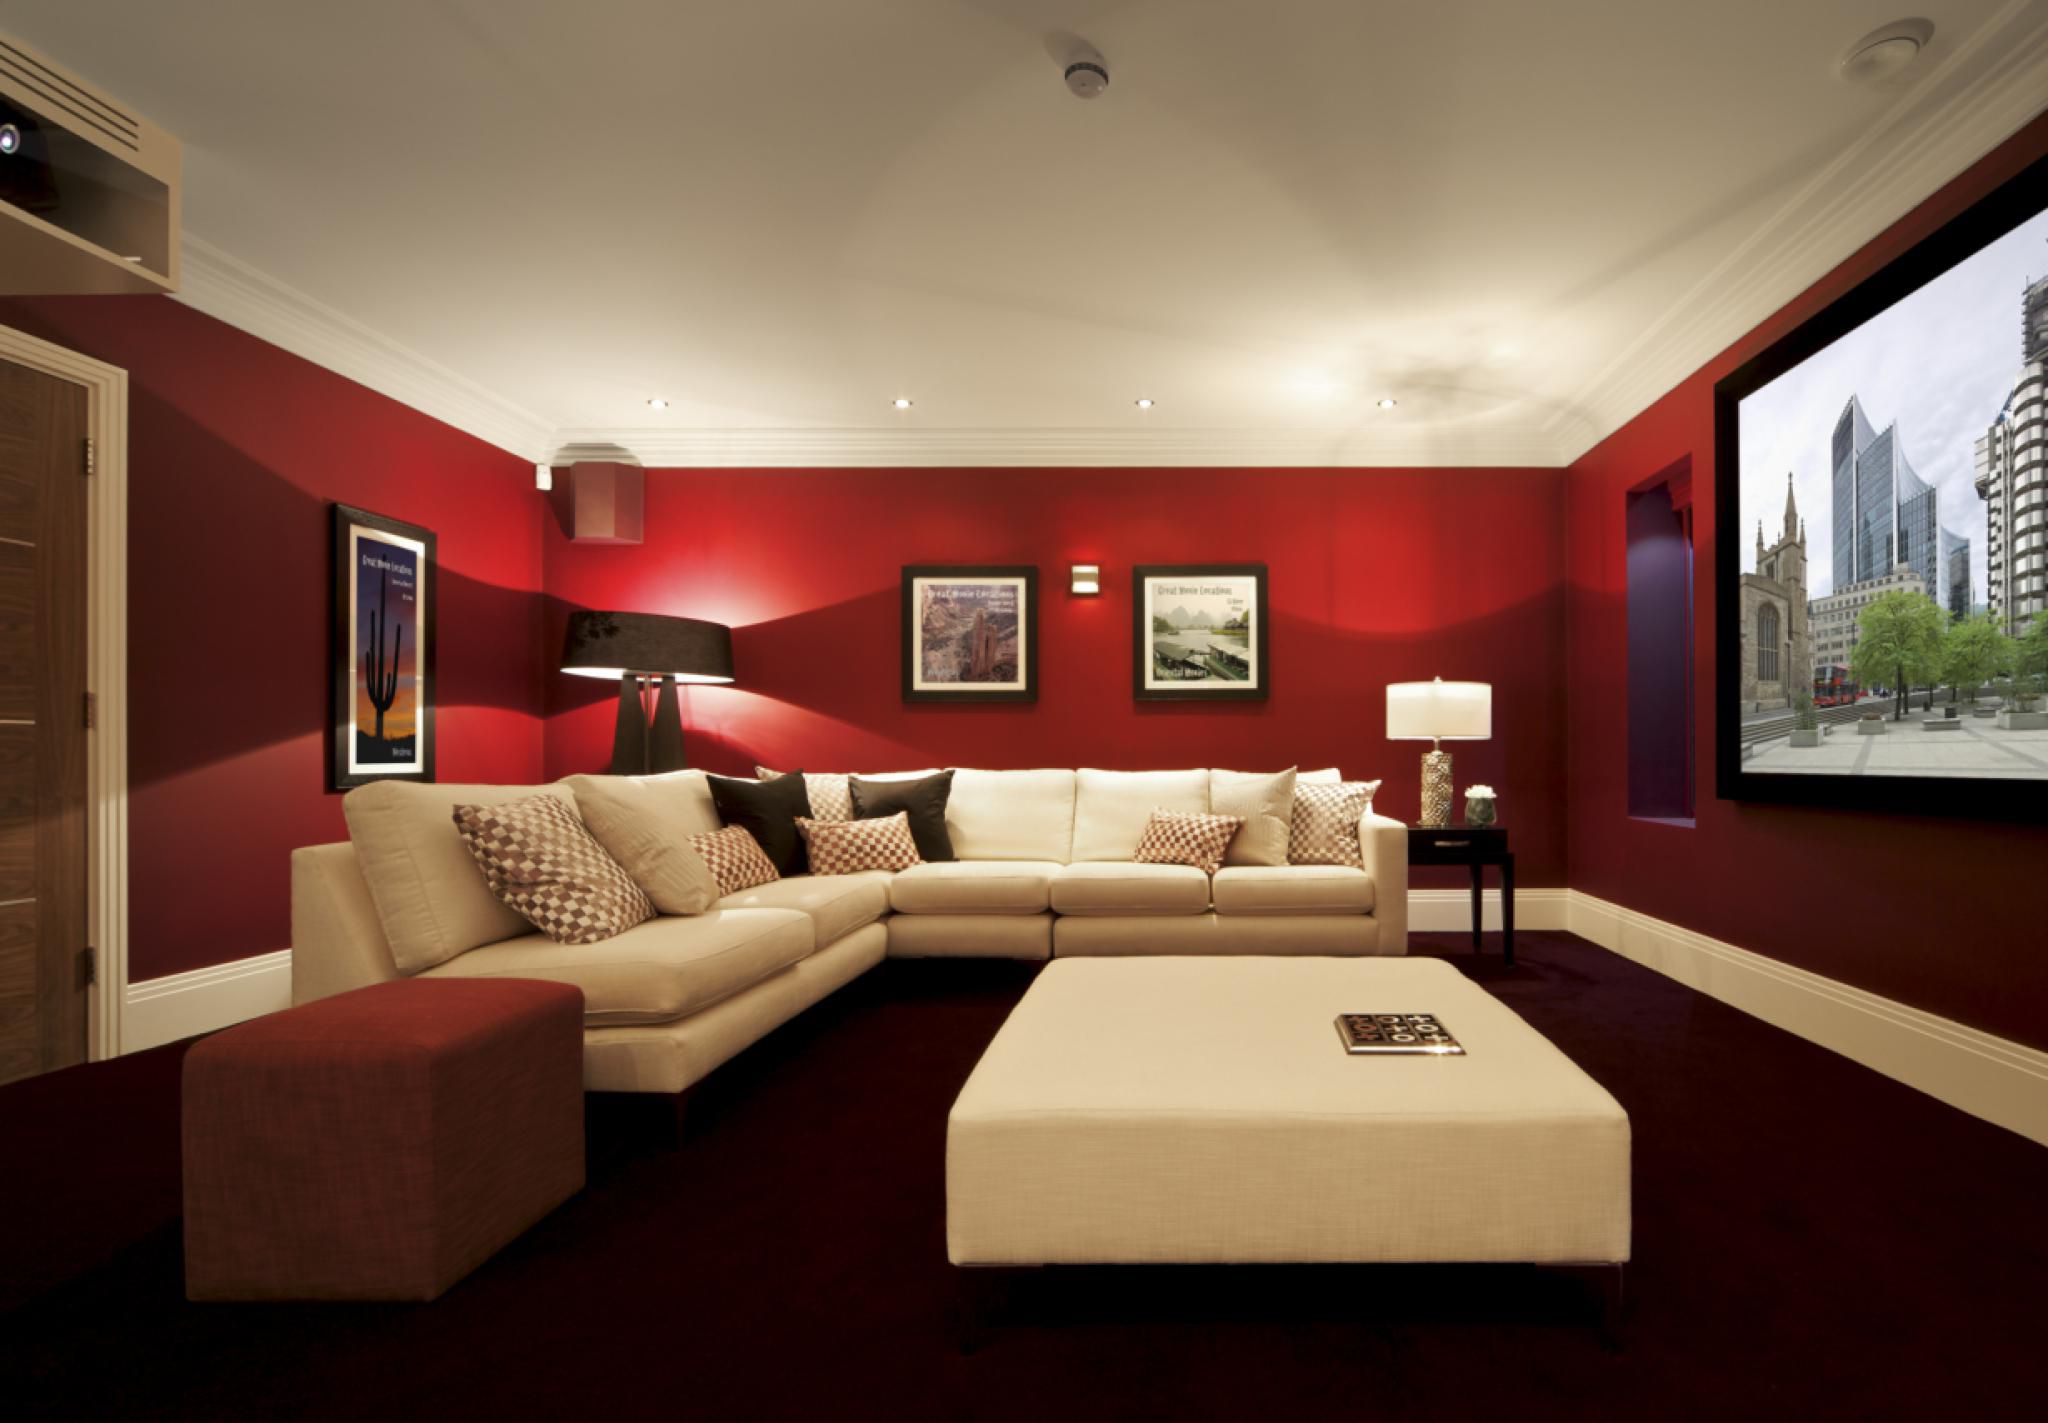 Paint Colors For Basement Family Room: Creating A Cozy And Inviting Space